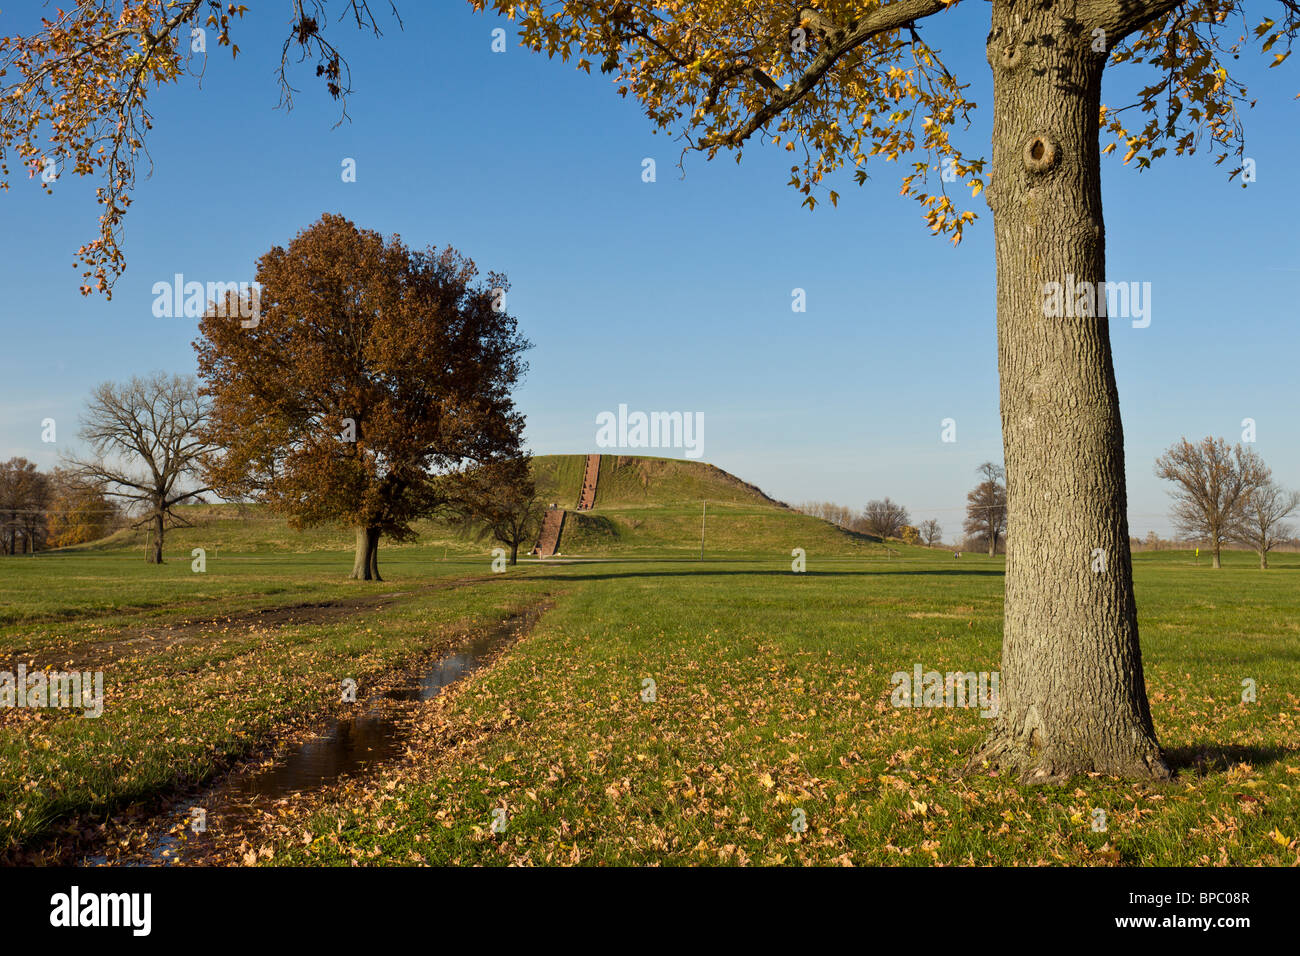 Monks Mound, the largest man-made earthen mound in the United States at Cahokia Mounds State Historic Site in Illinois, USA. Stock Photo